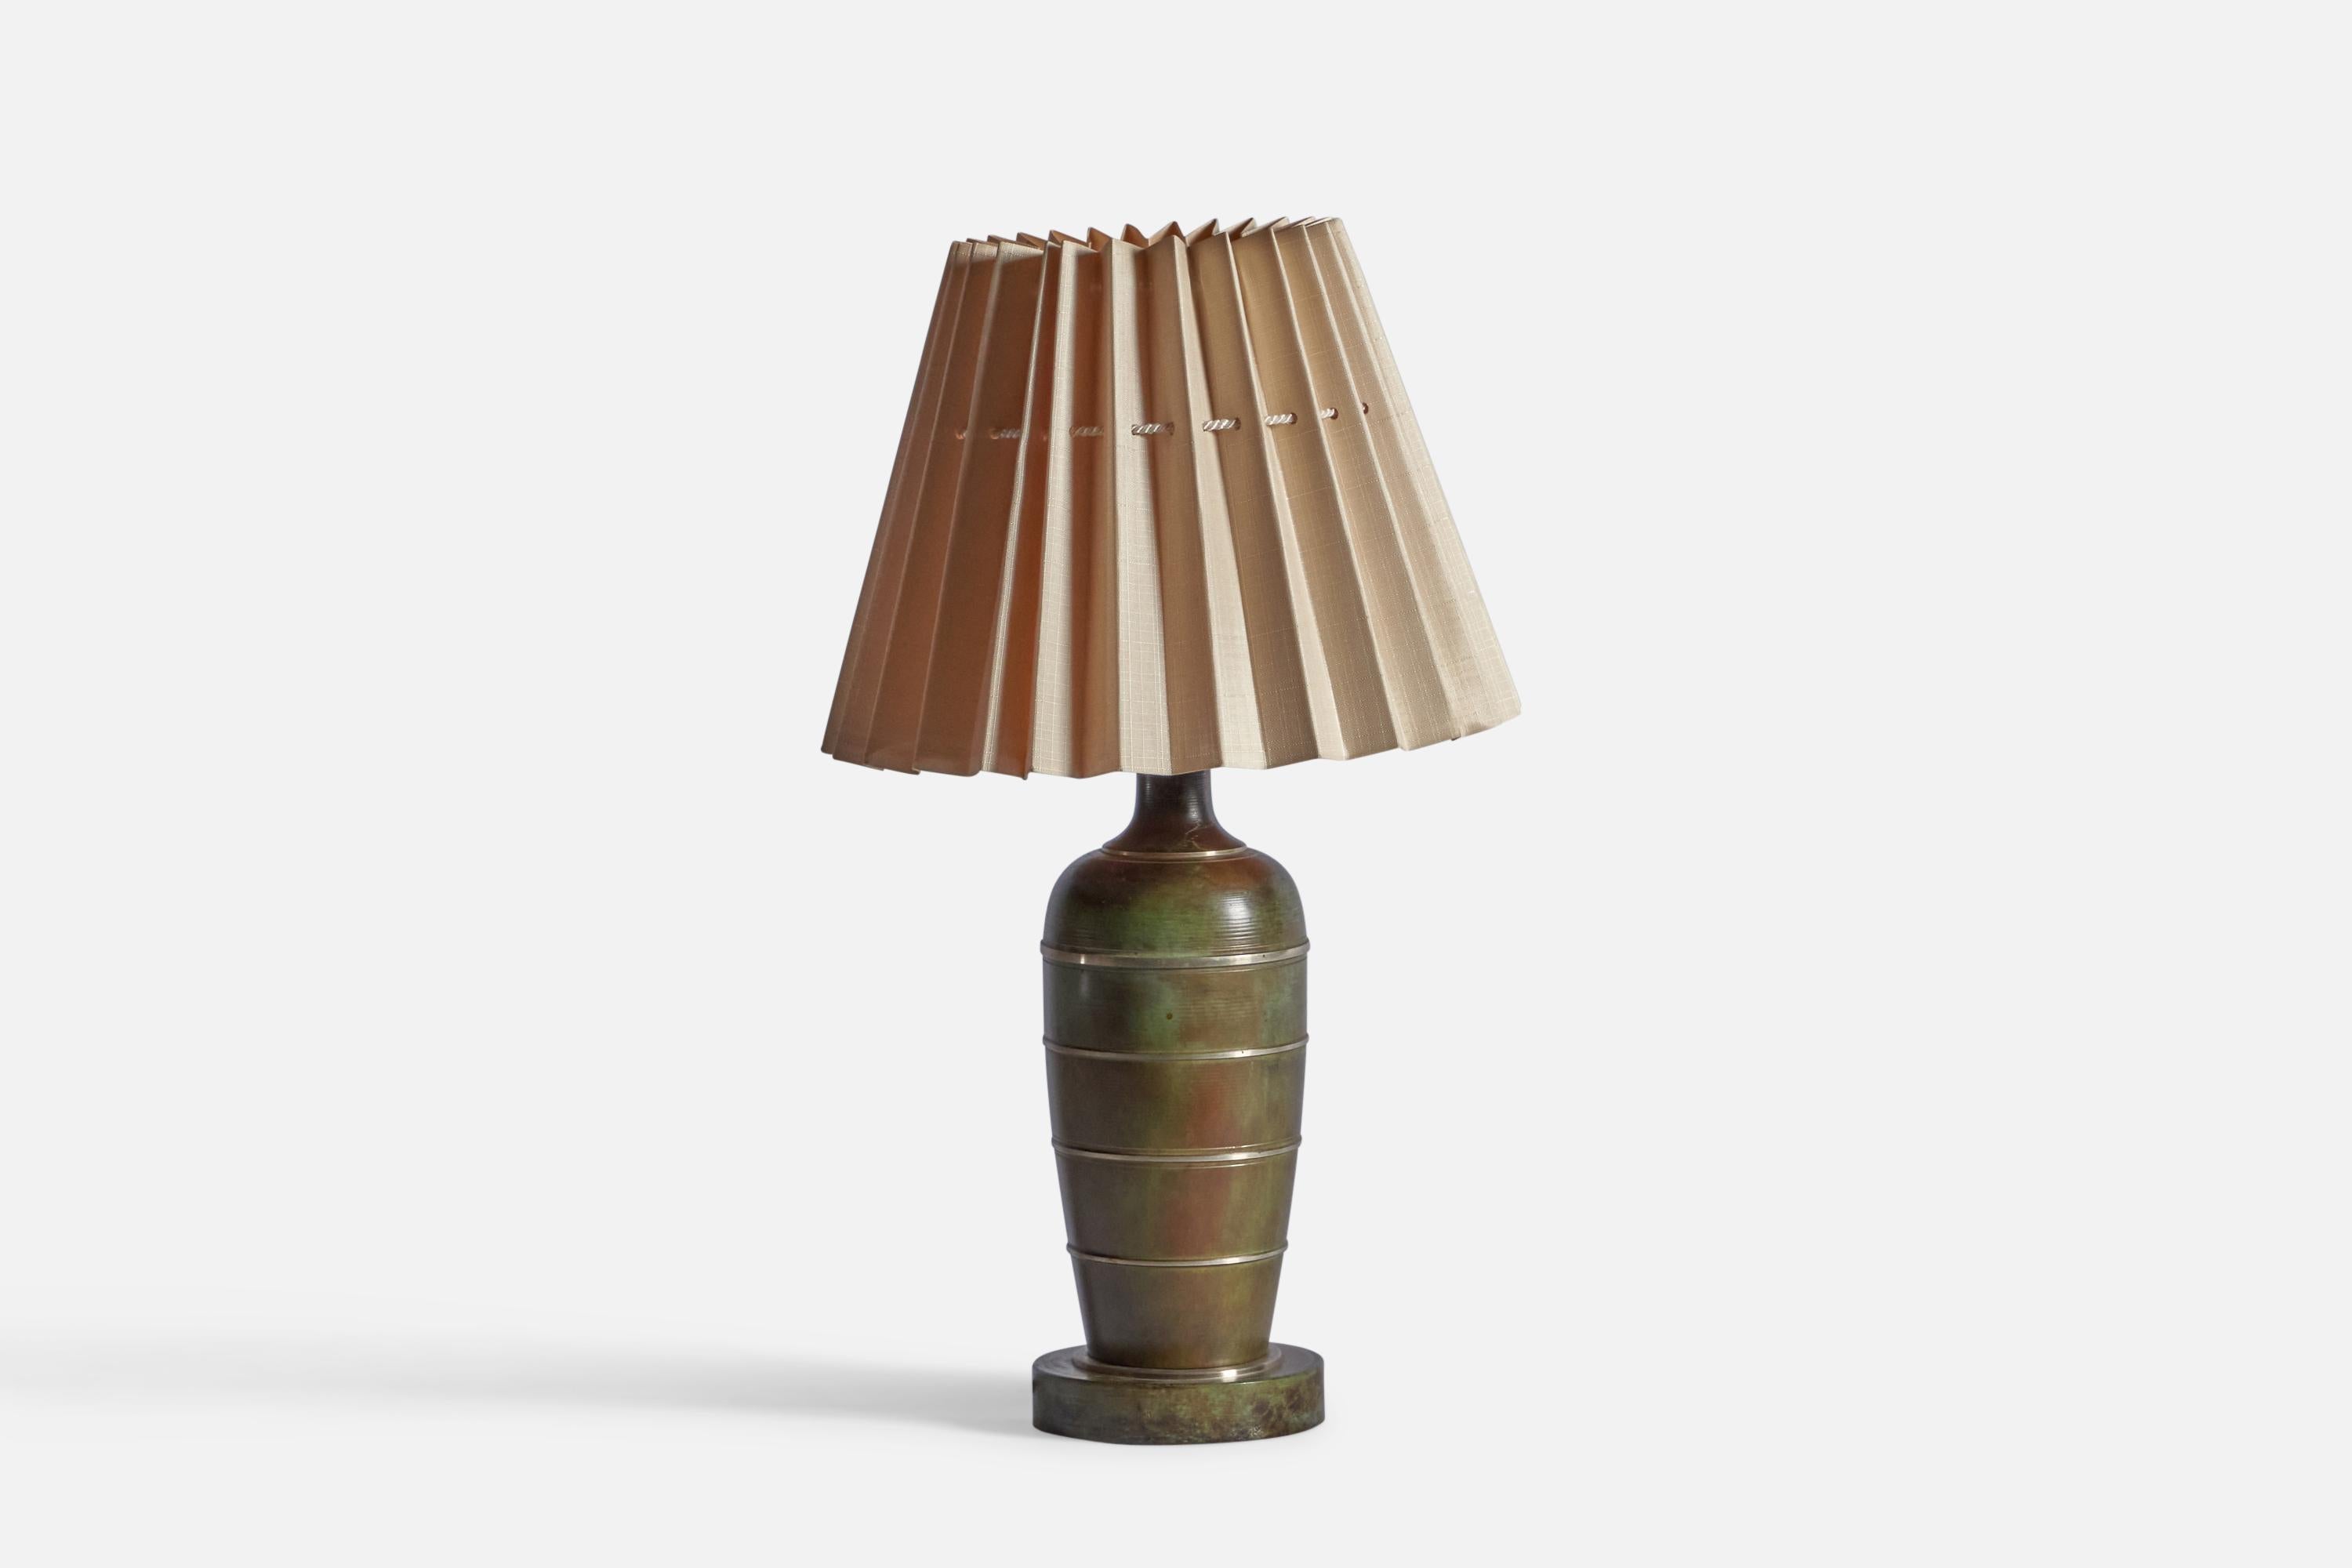 A bronze and paper table lamp, designed and produced in Sweden, 1930s.

Sold with Lampshade

Dimensions stated are of Table Lamp with Lampshade attached.